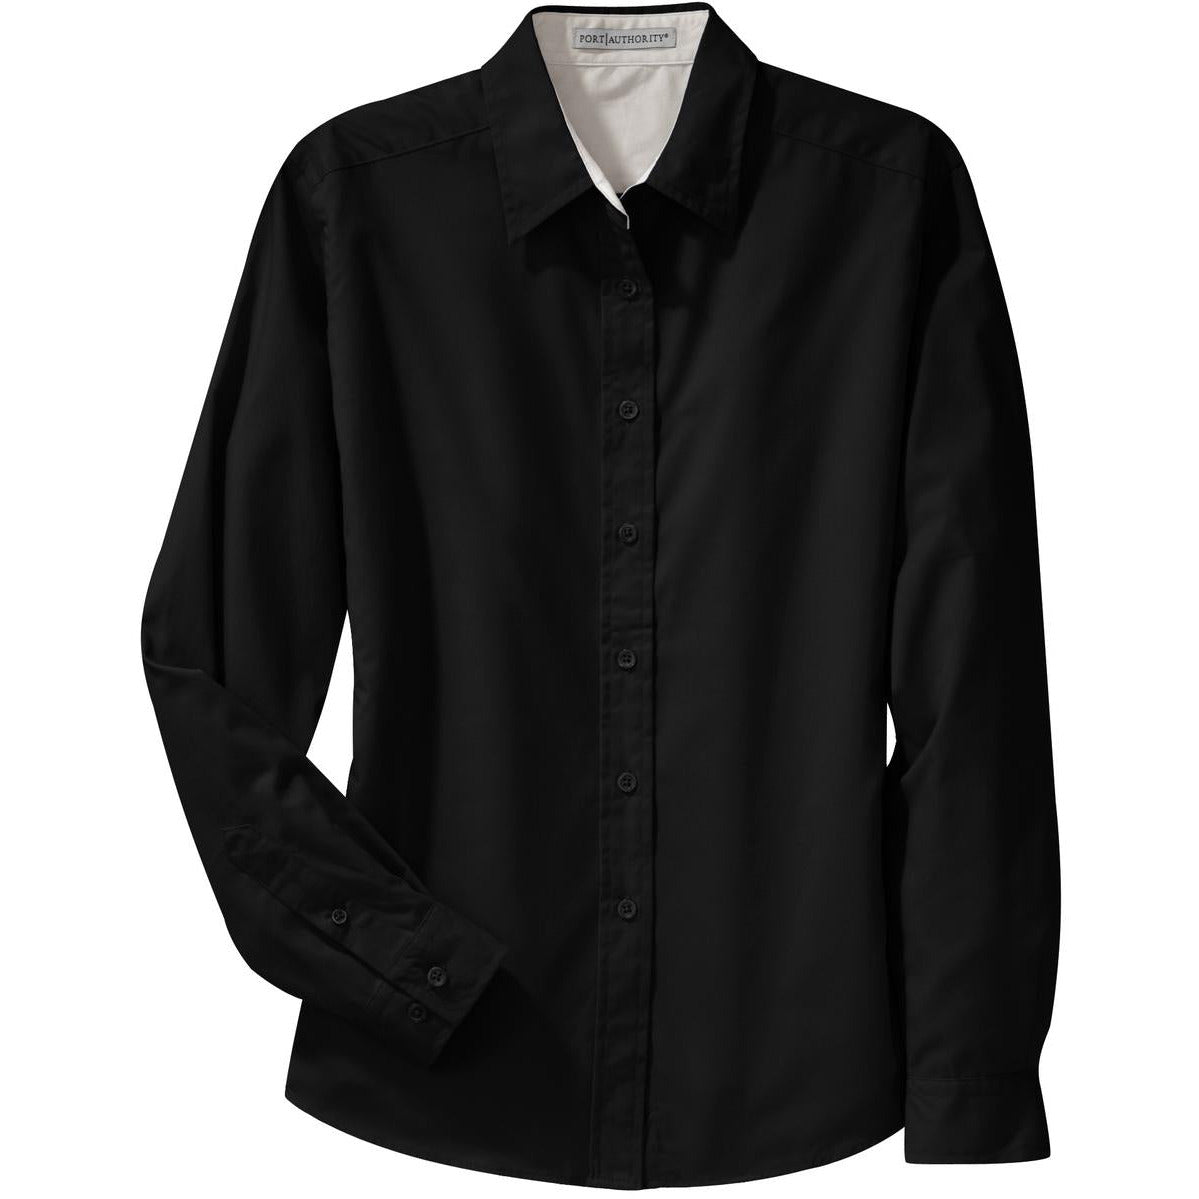 Port Authority® Ladies Long Sleeve Easy Care Shirt